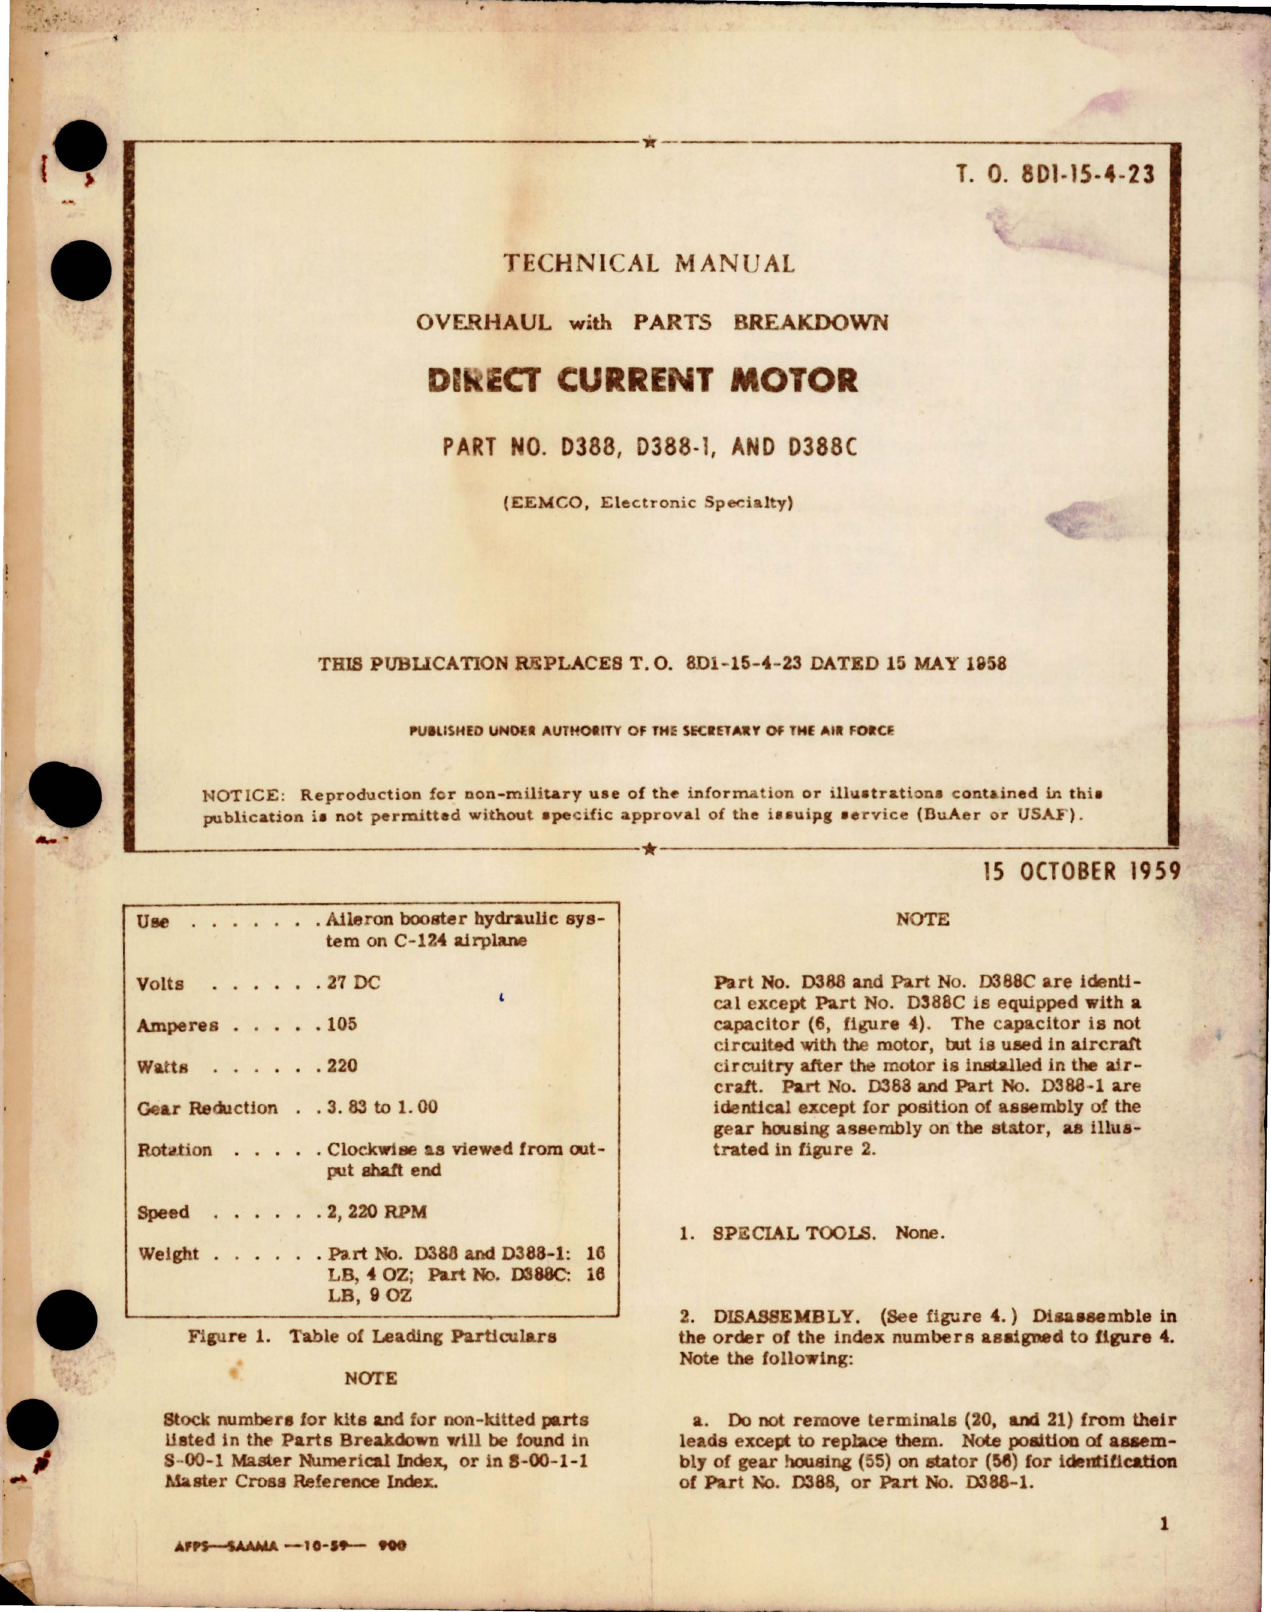 Sample page 1 from AirCorps Library document: Overhaul with Parts Breakdown for Direct Current Motor - Part D388, D388-1, D388C